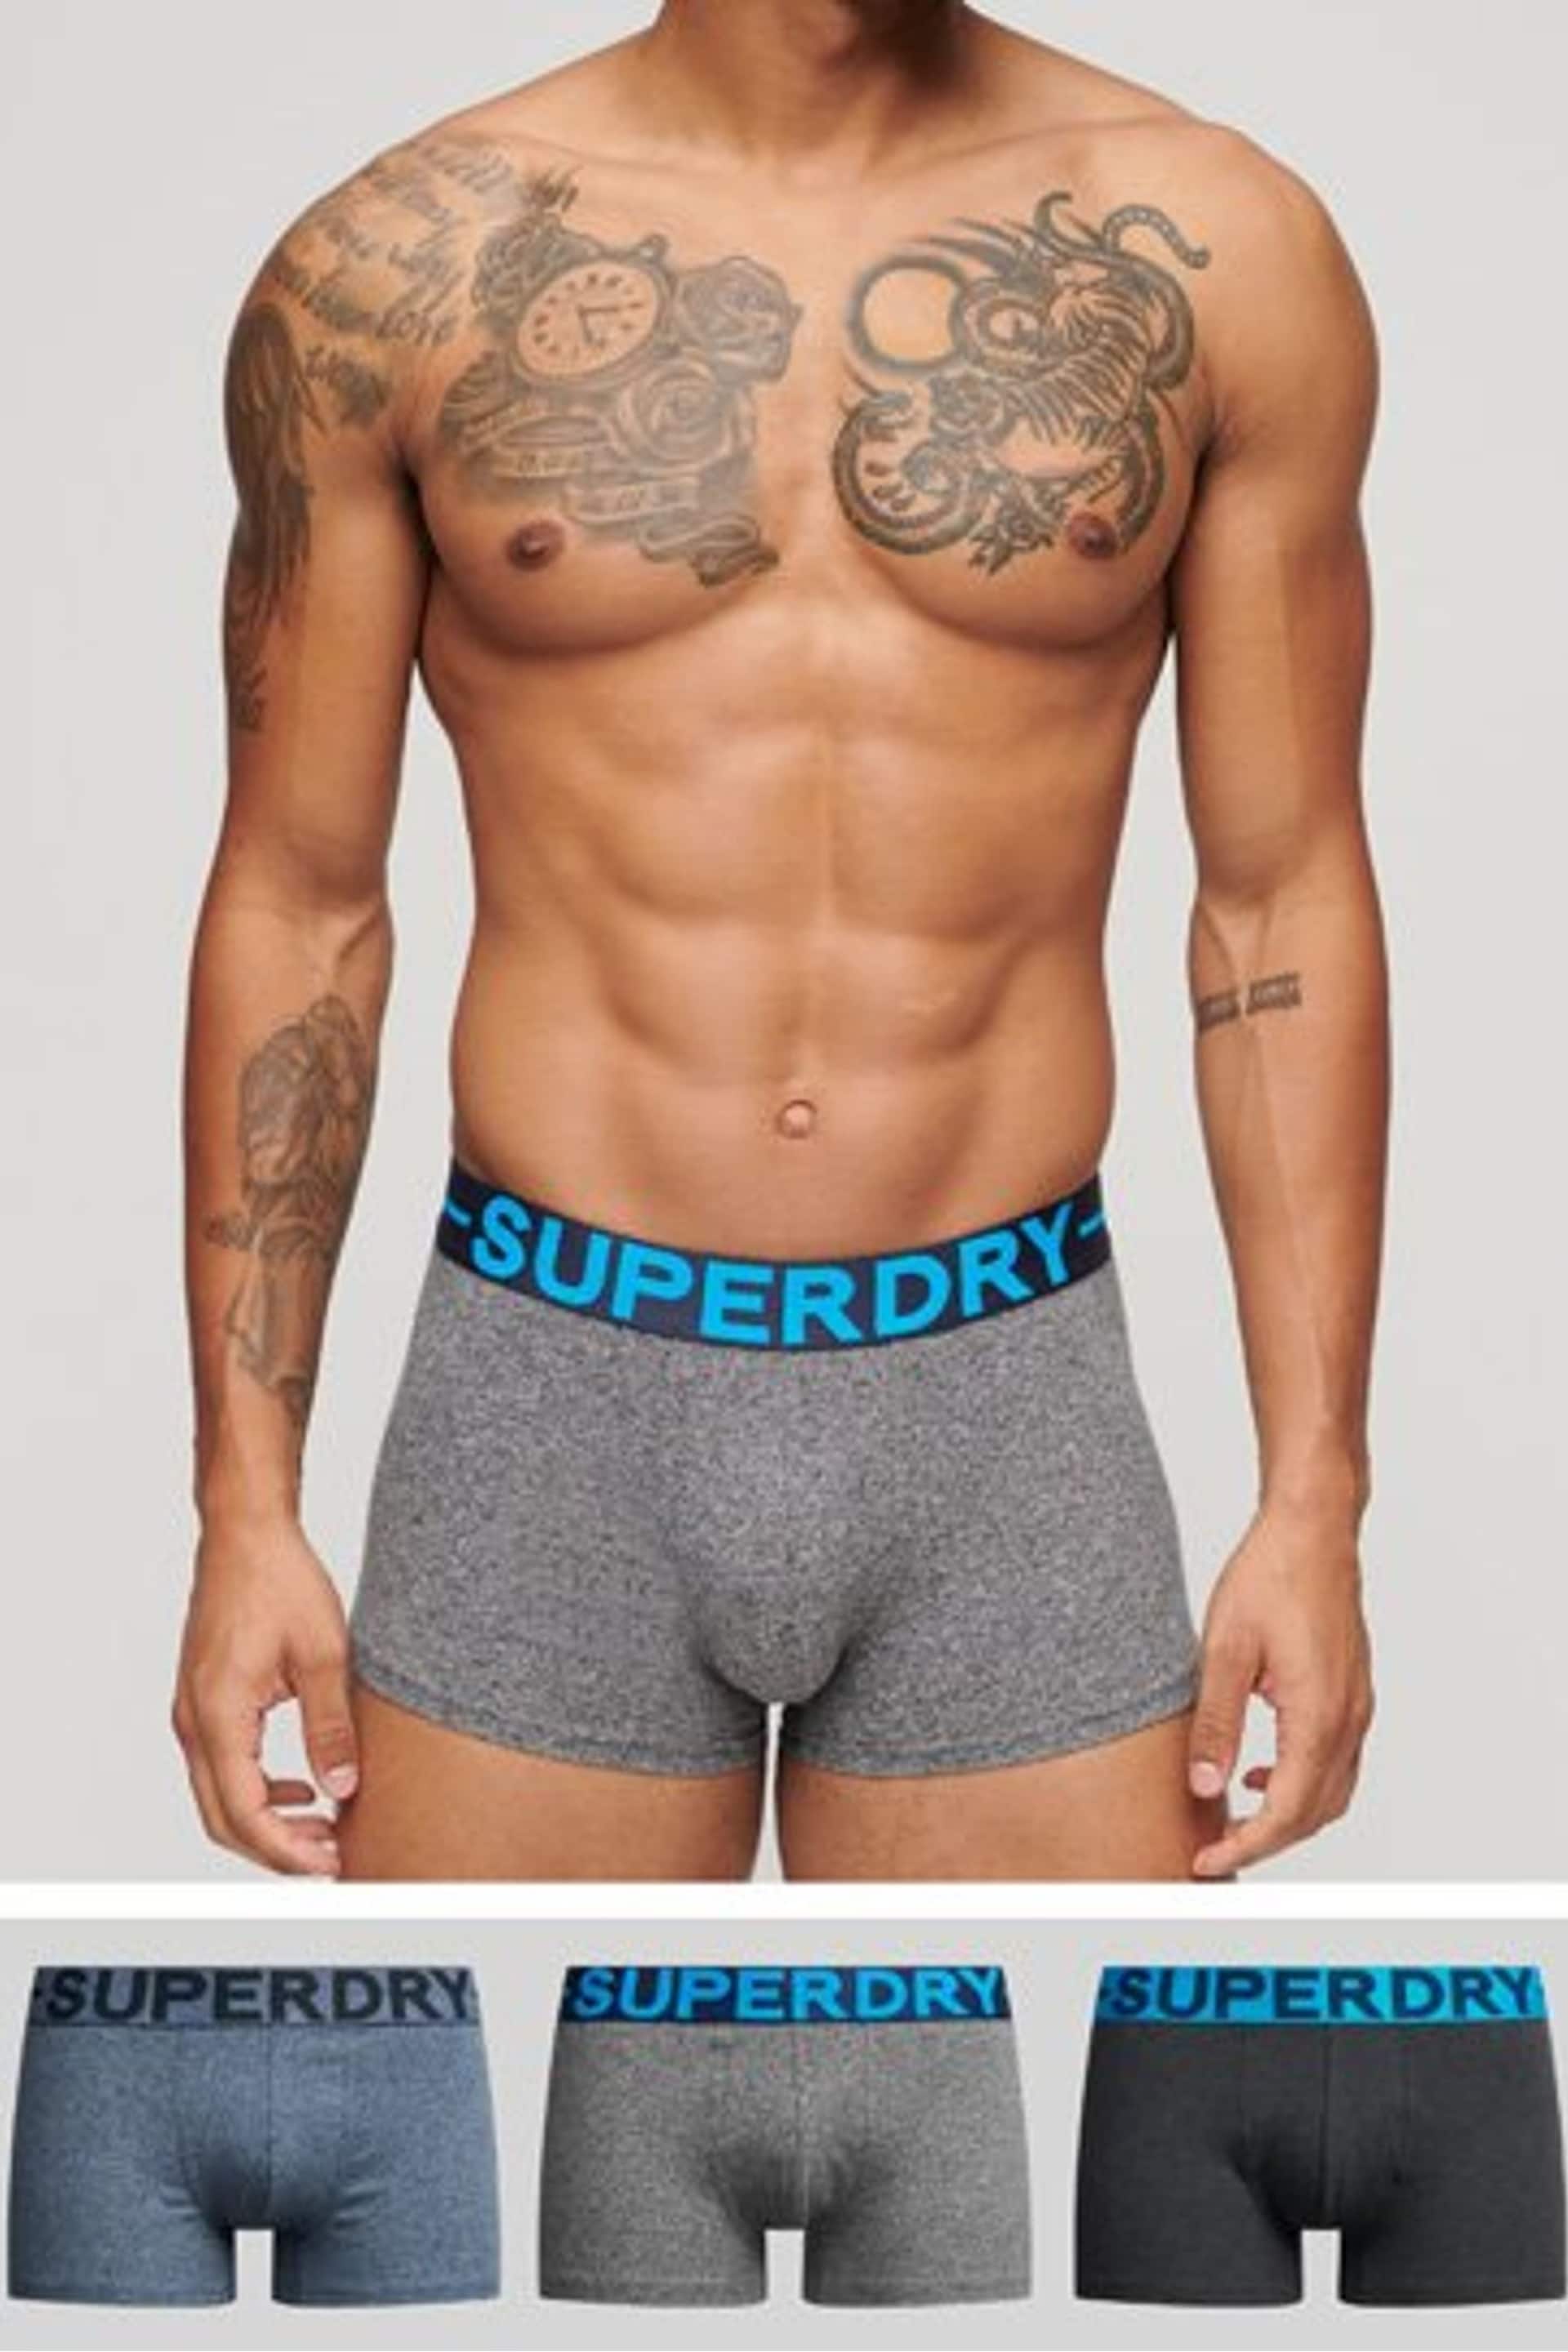 Superdry Grey Cotton Trunks 3 Pack - Image 1 of 3